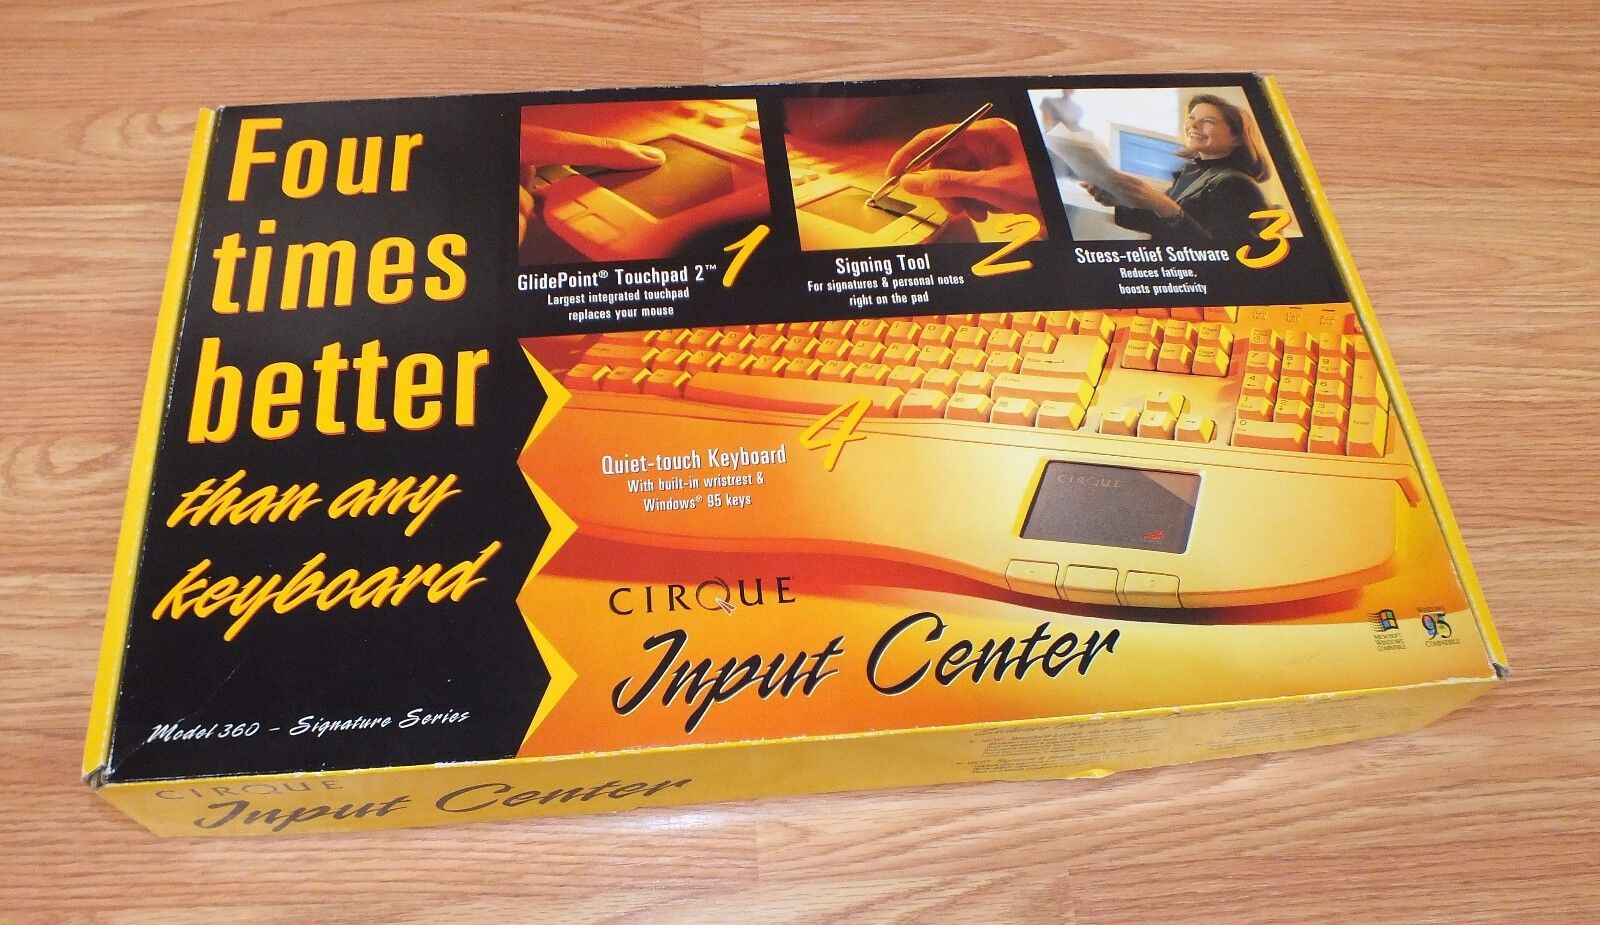 Vintage Cirque Input Center CIC360 Glidepoint Keyboard with Signing Tool *READ* 